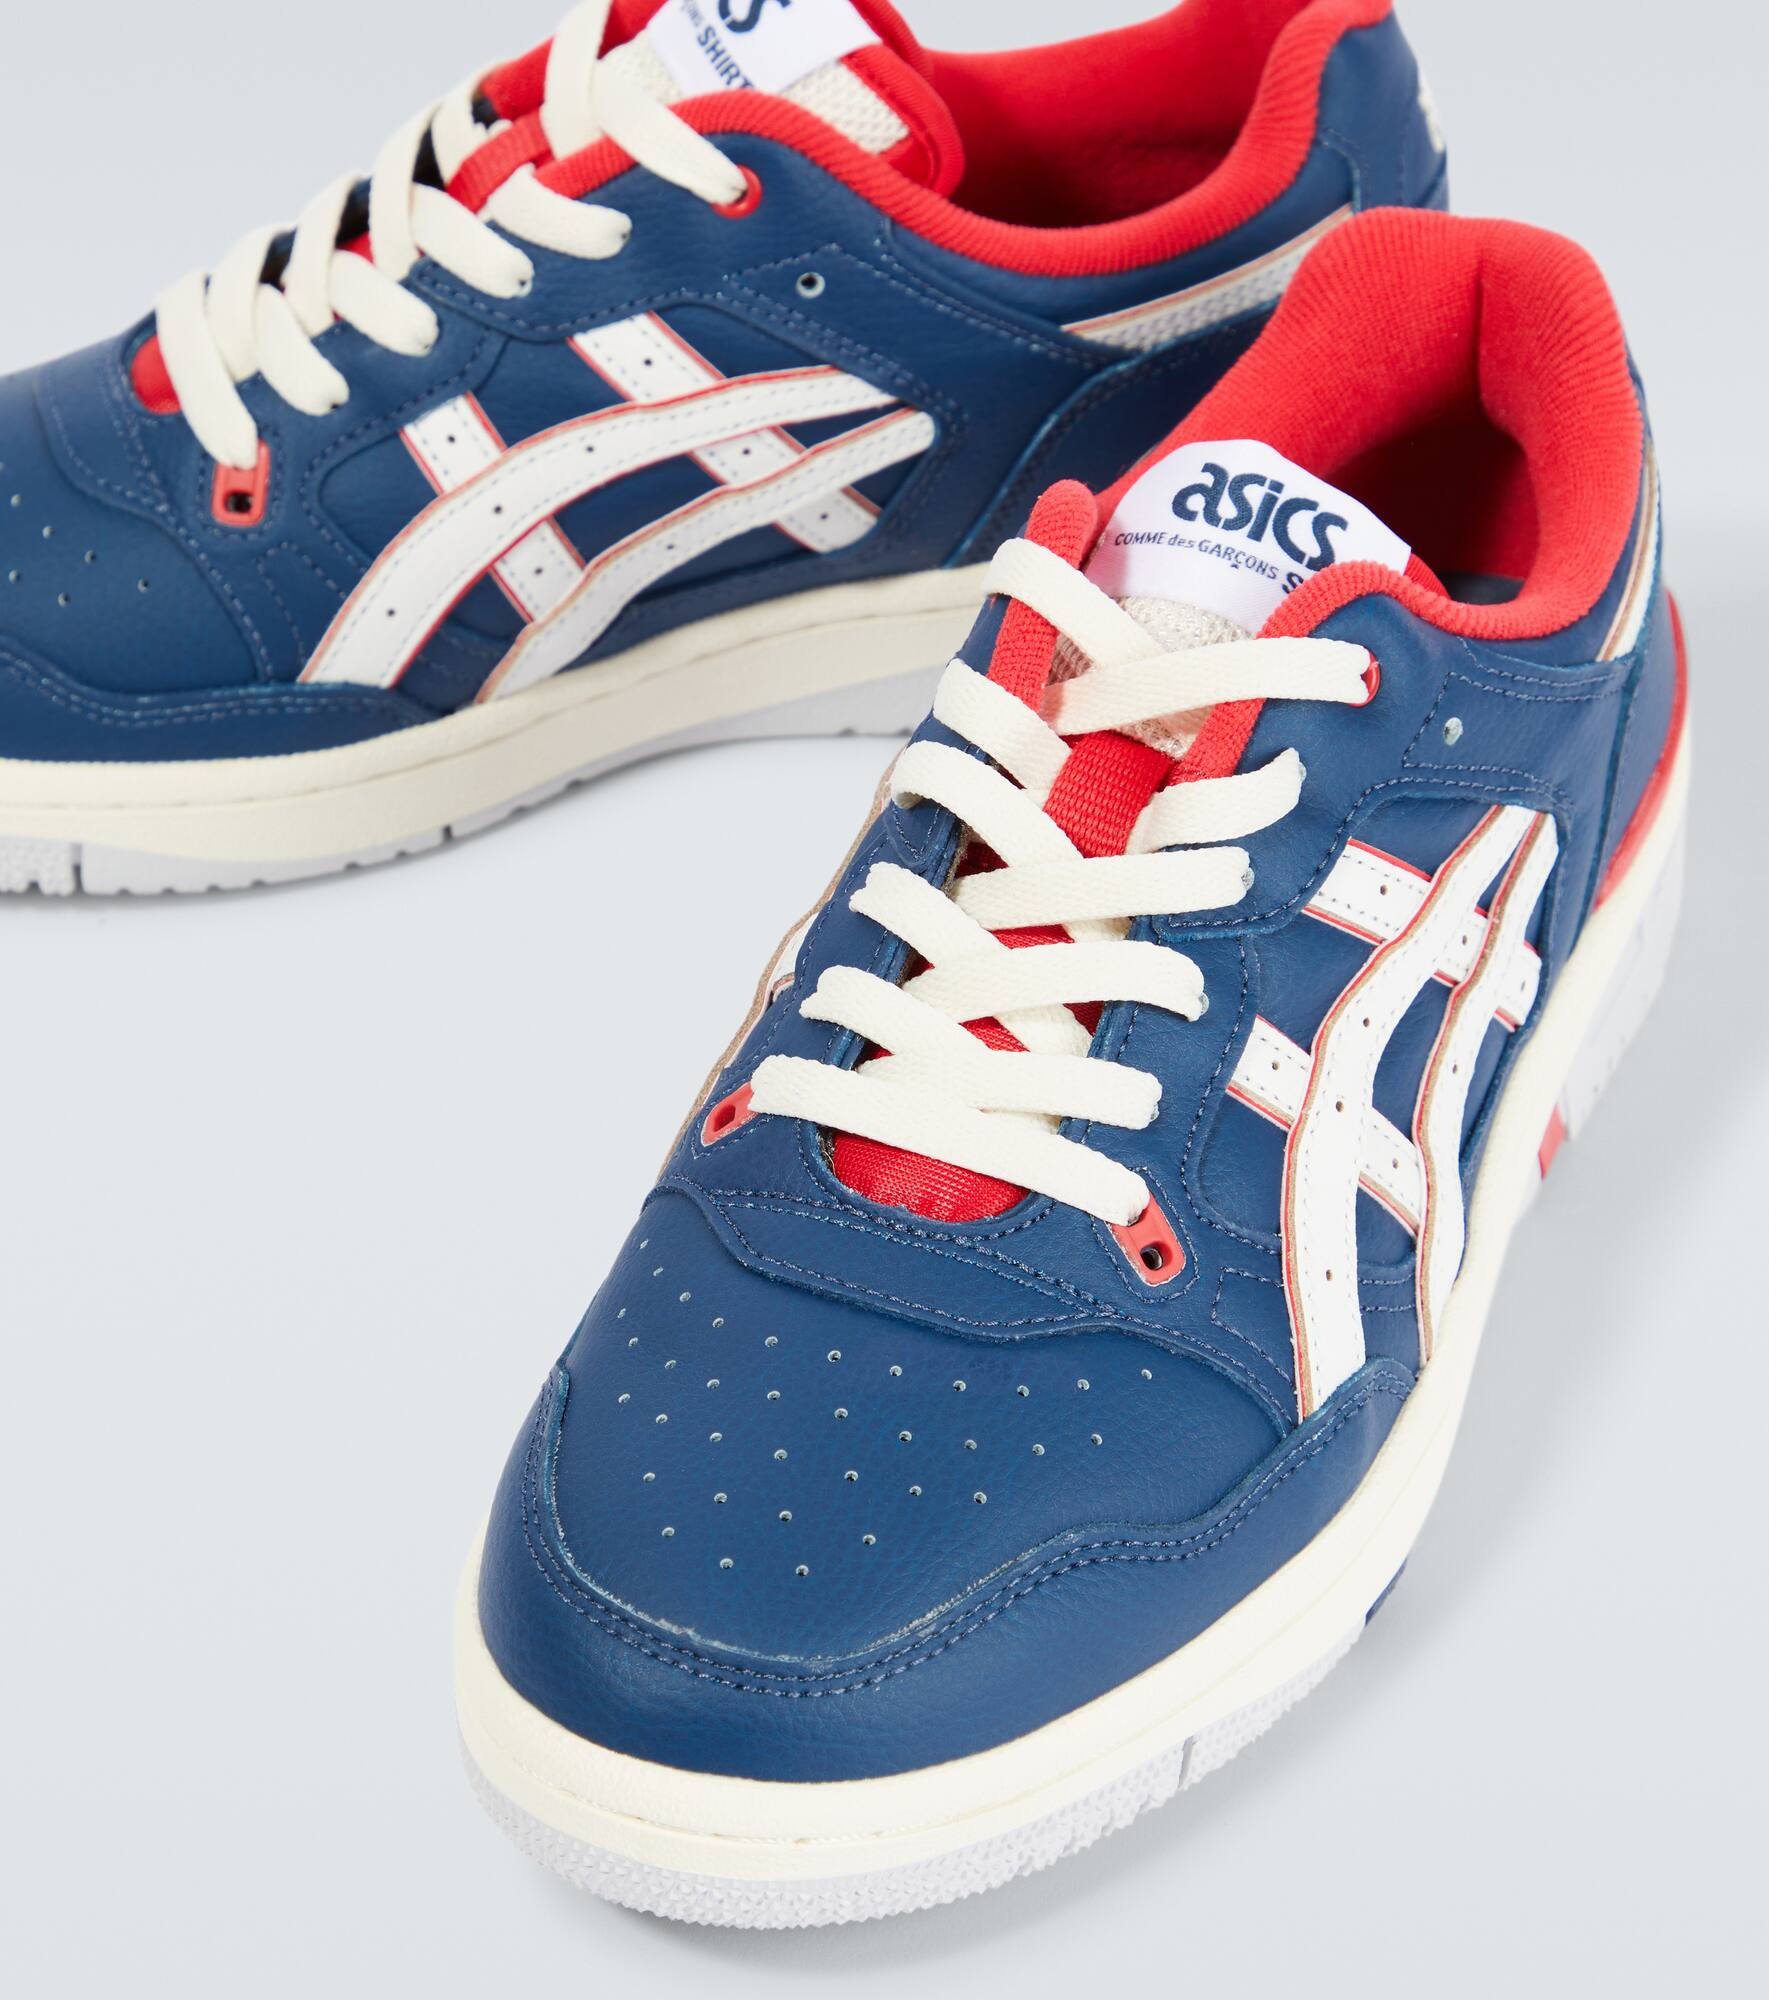 x Asics EX89 leather sneakers - 3